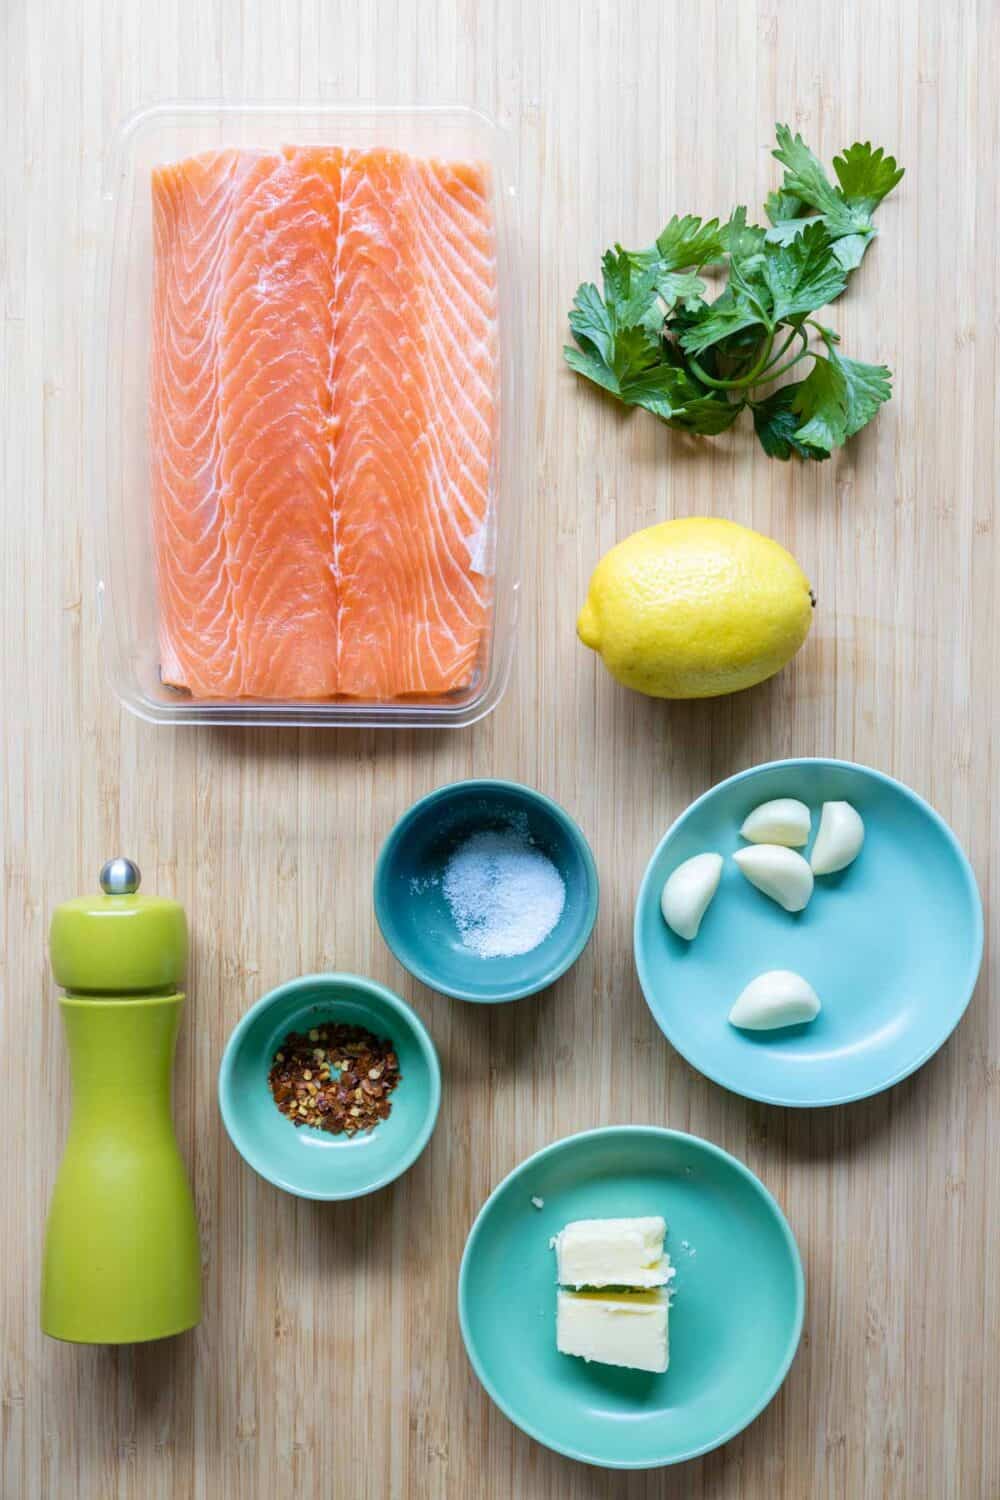 Ingredients to make pan-seared salmon laid out on a kitchen counter.